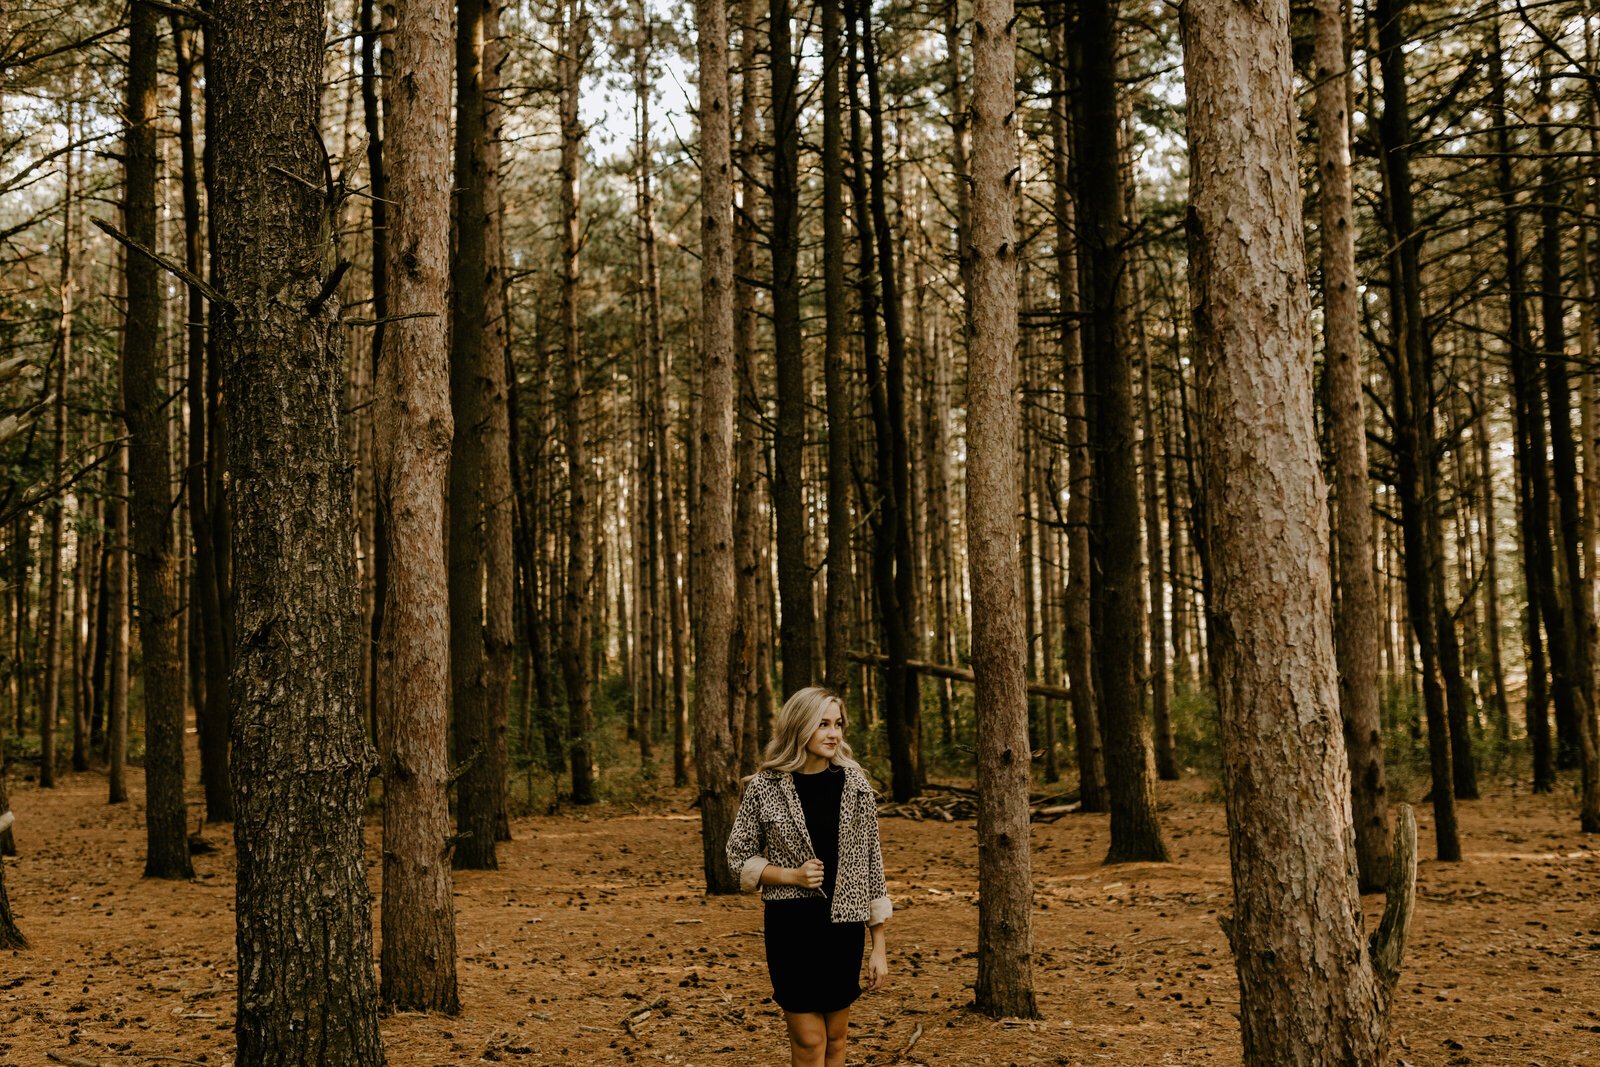 A girl holding her jacket as she stands in the middle of a forest